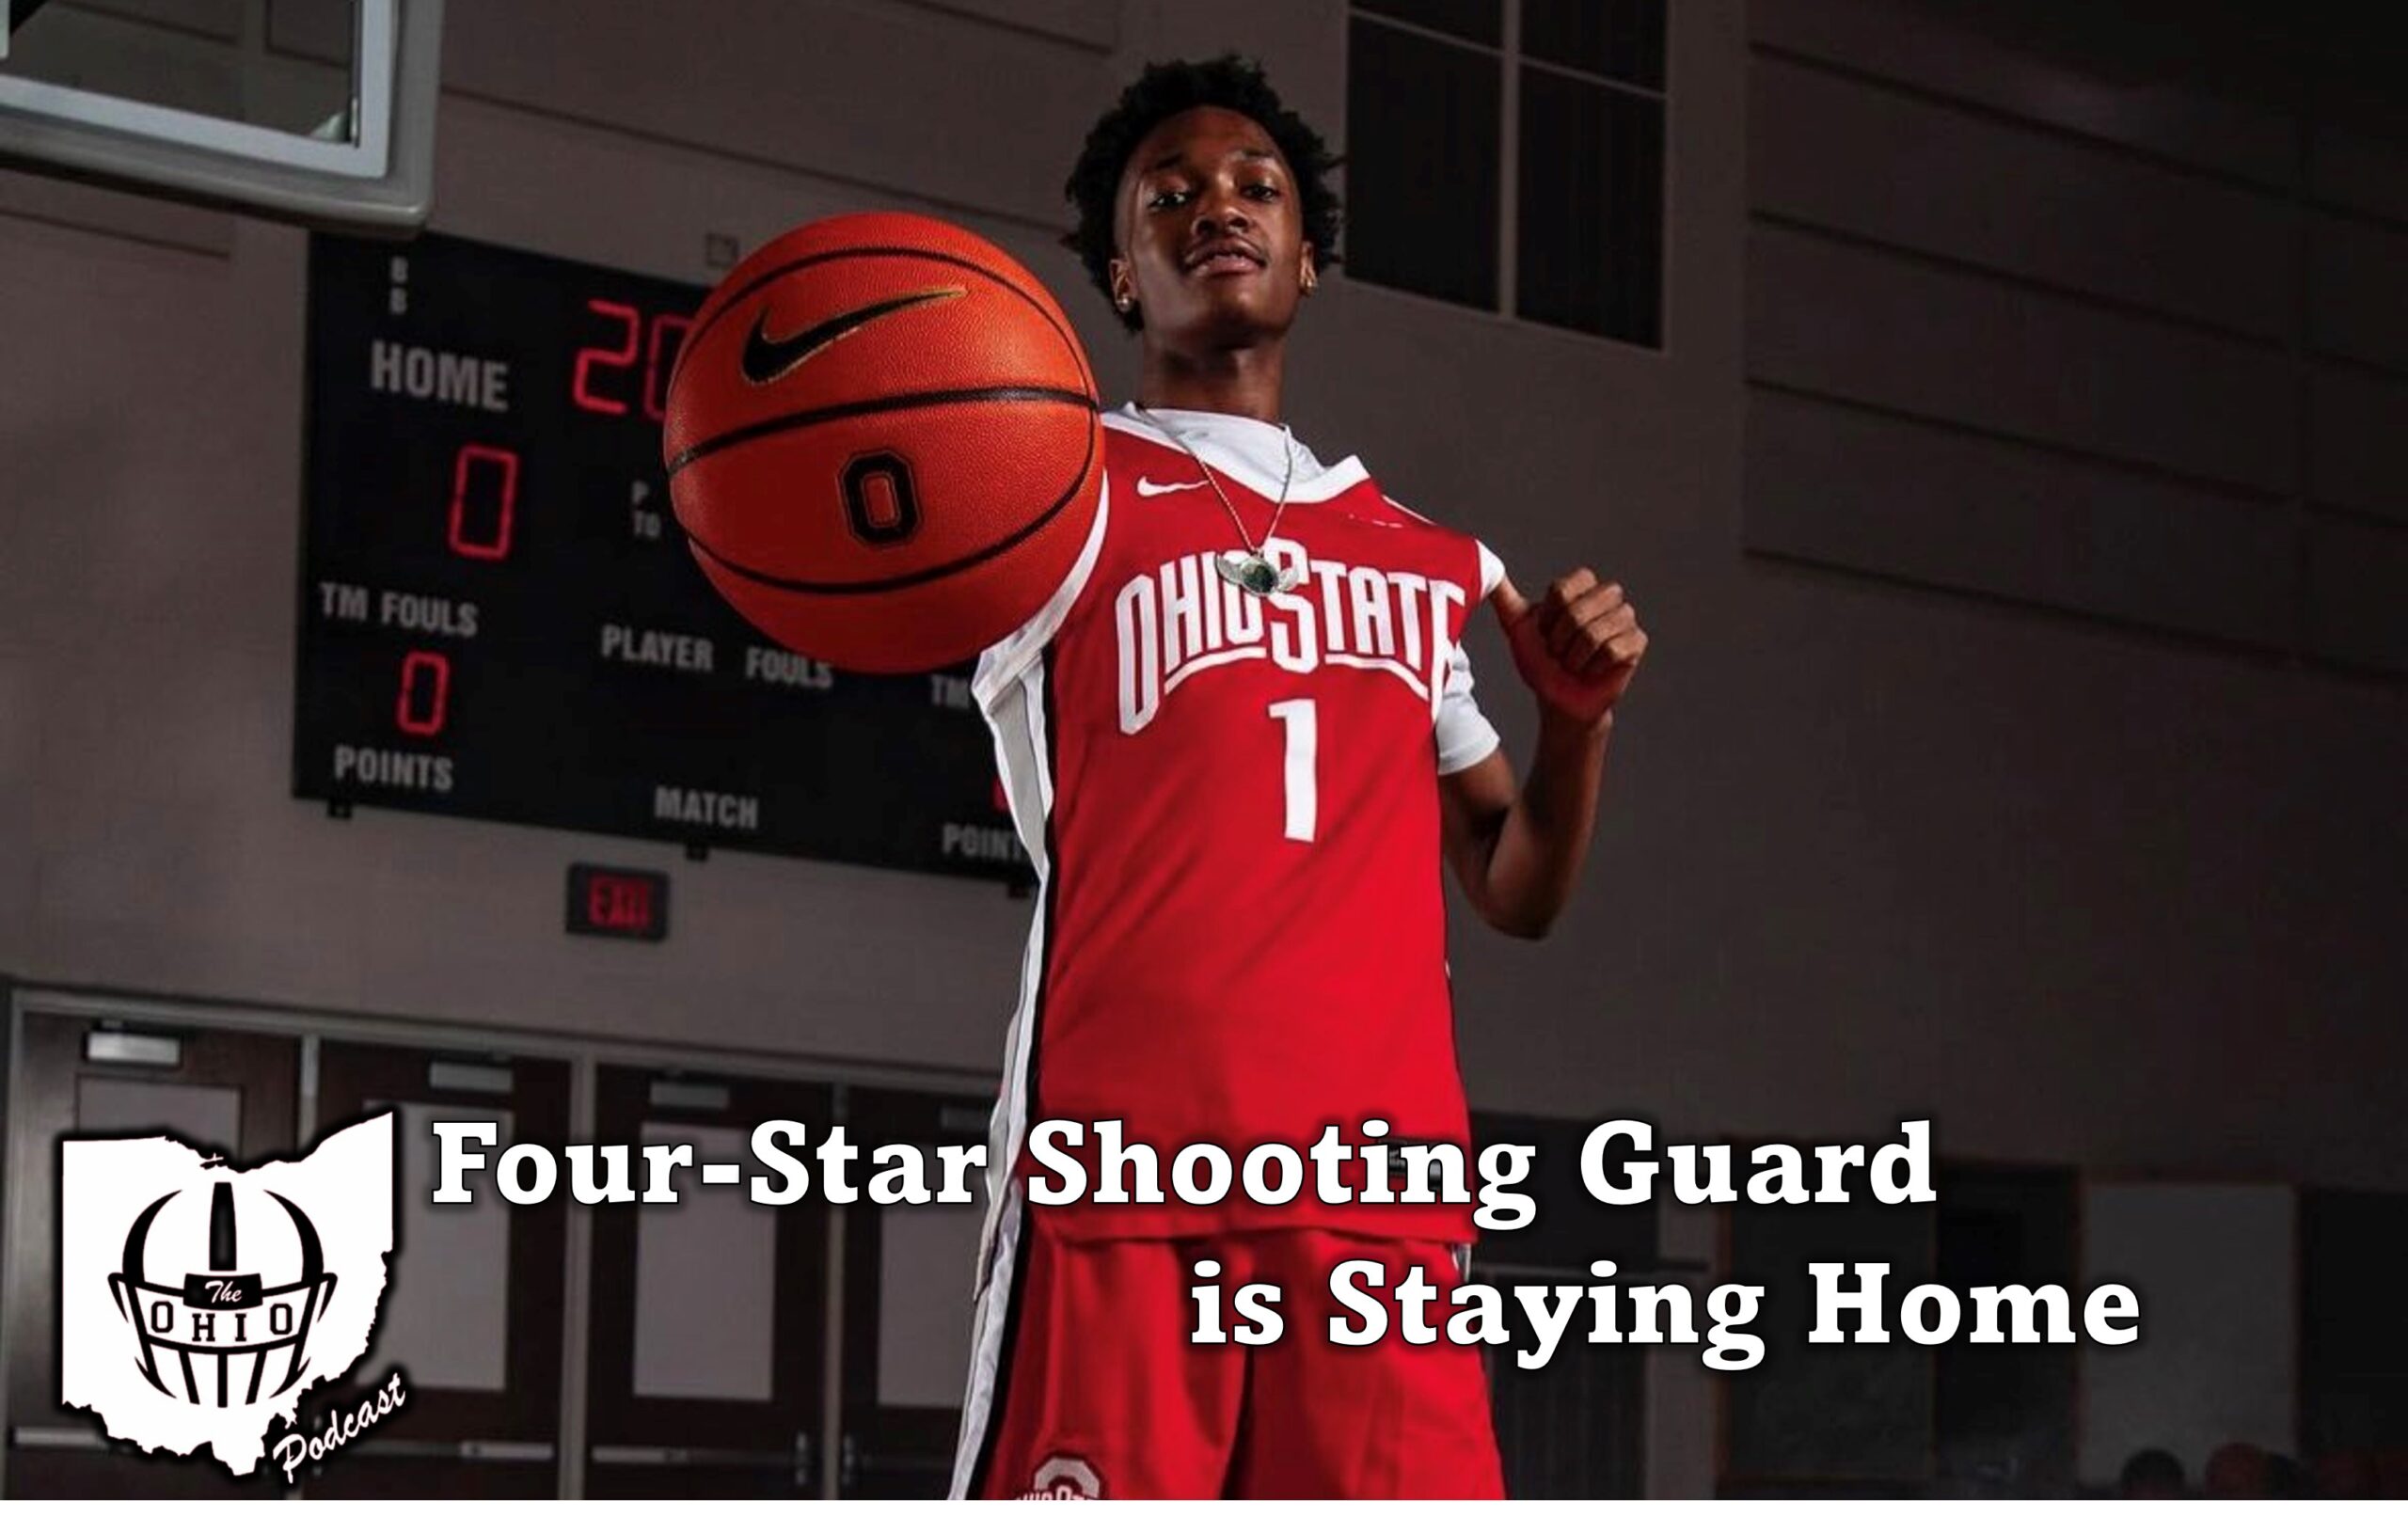 Four-Star Shooting Guard is Staying Home.